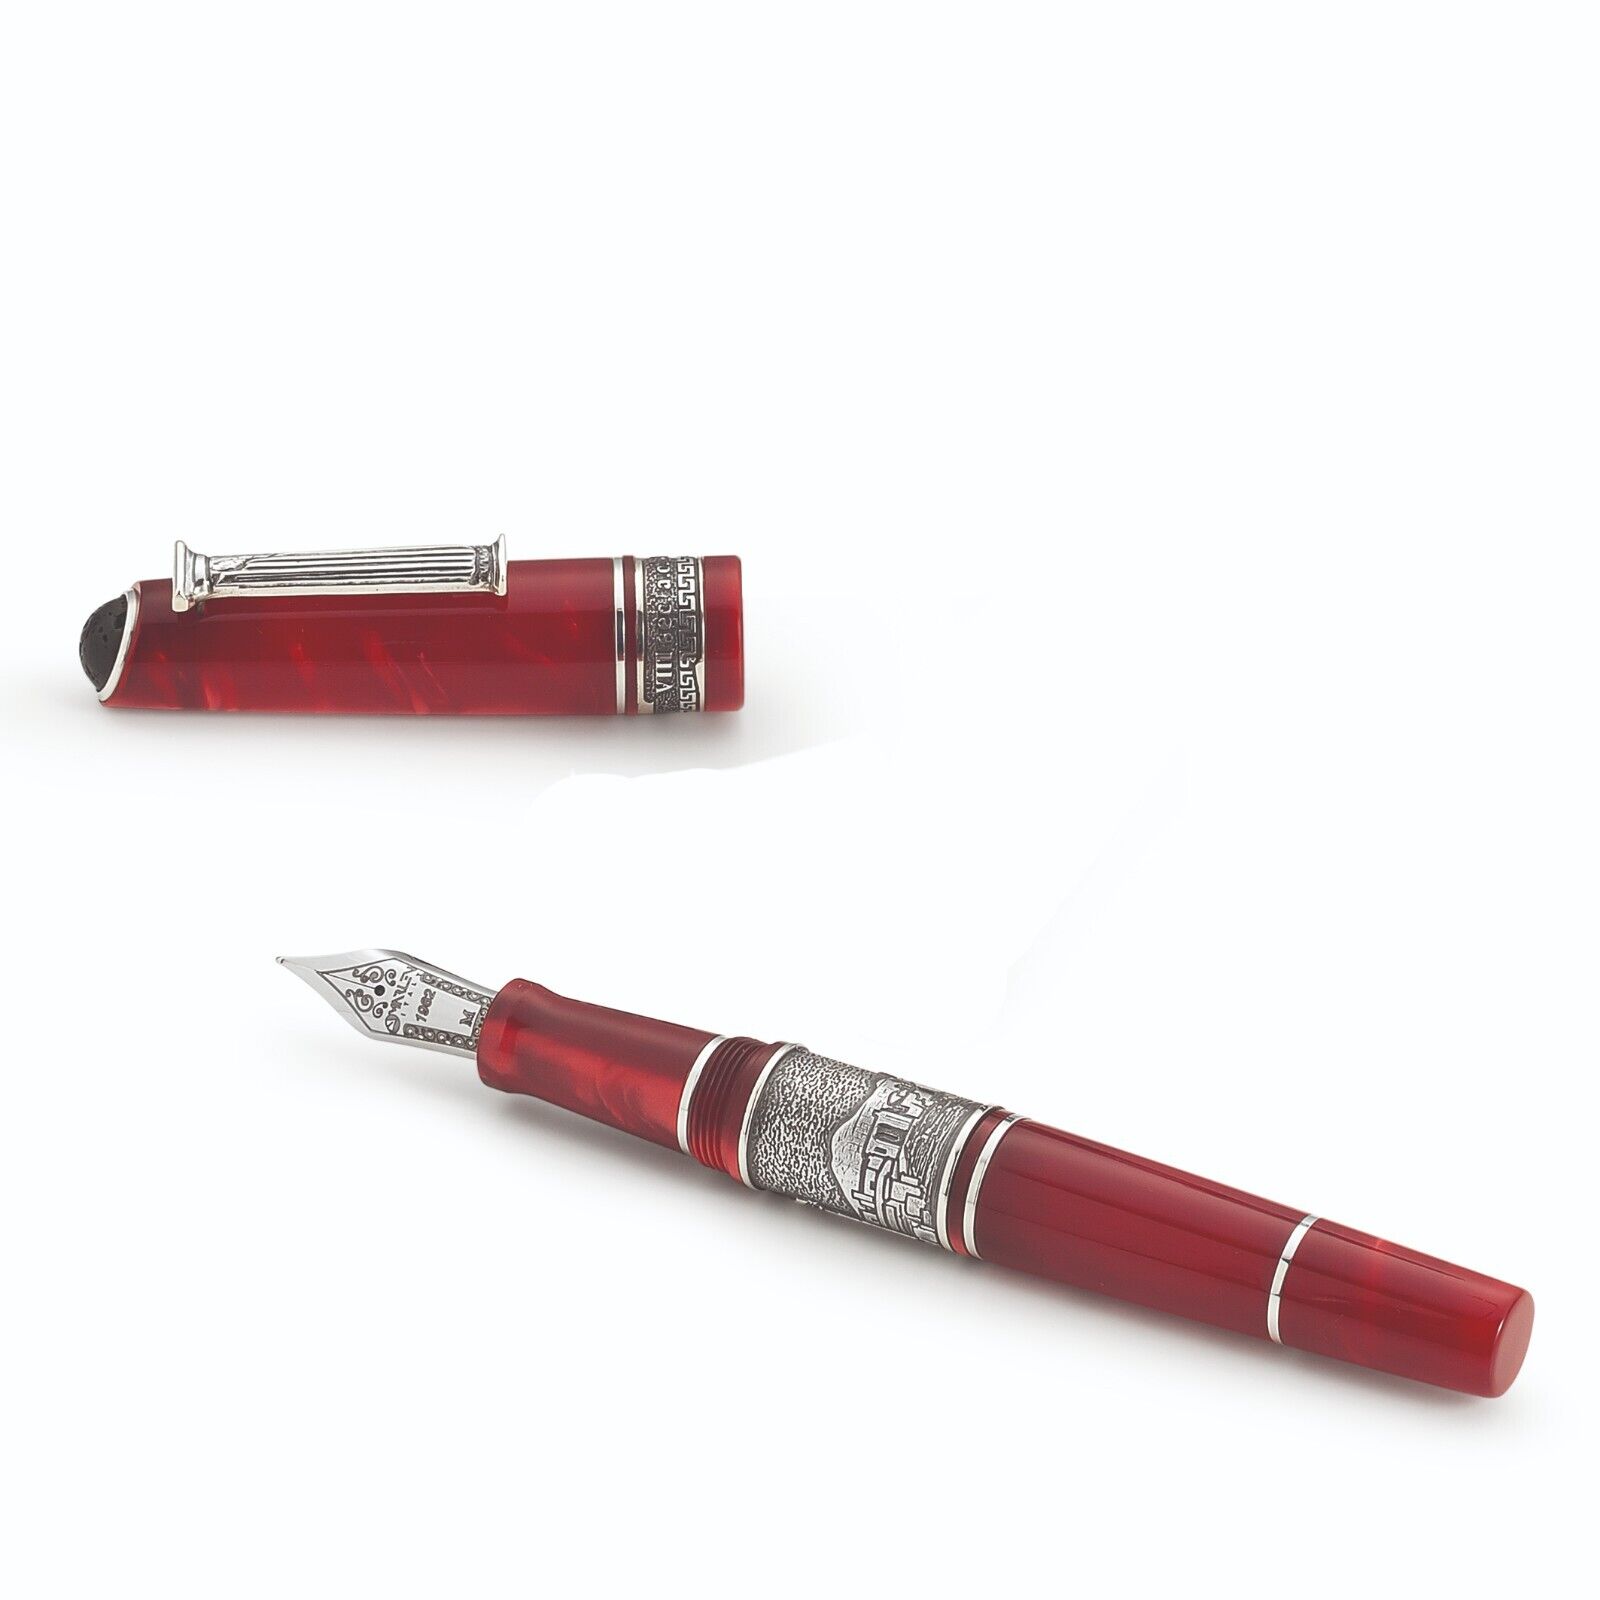 Marlen OLD CITIES POMPEII FOUNTAIN PEN IN PEARLY SHADED RED WITH LAVA ROCK /NEW